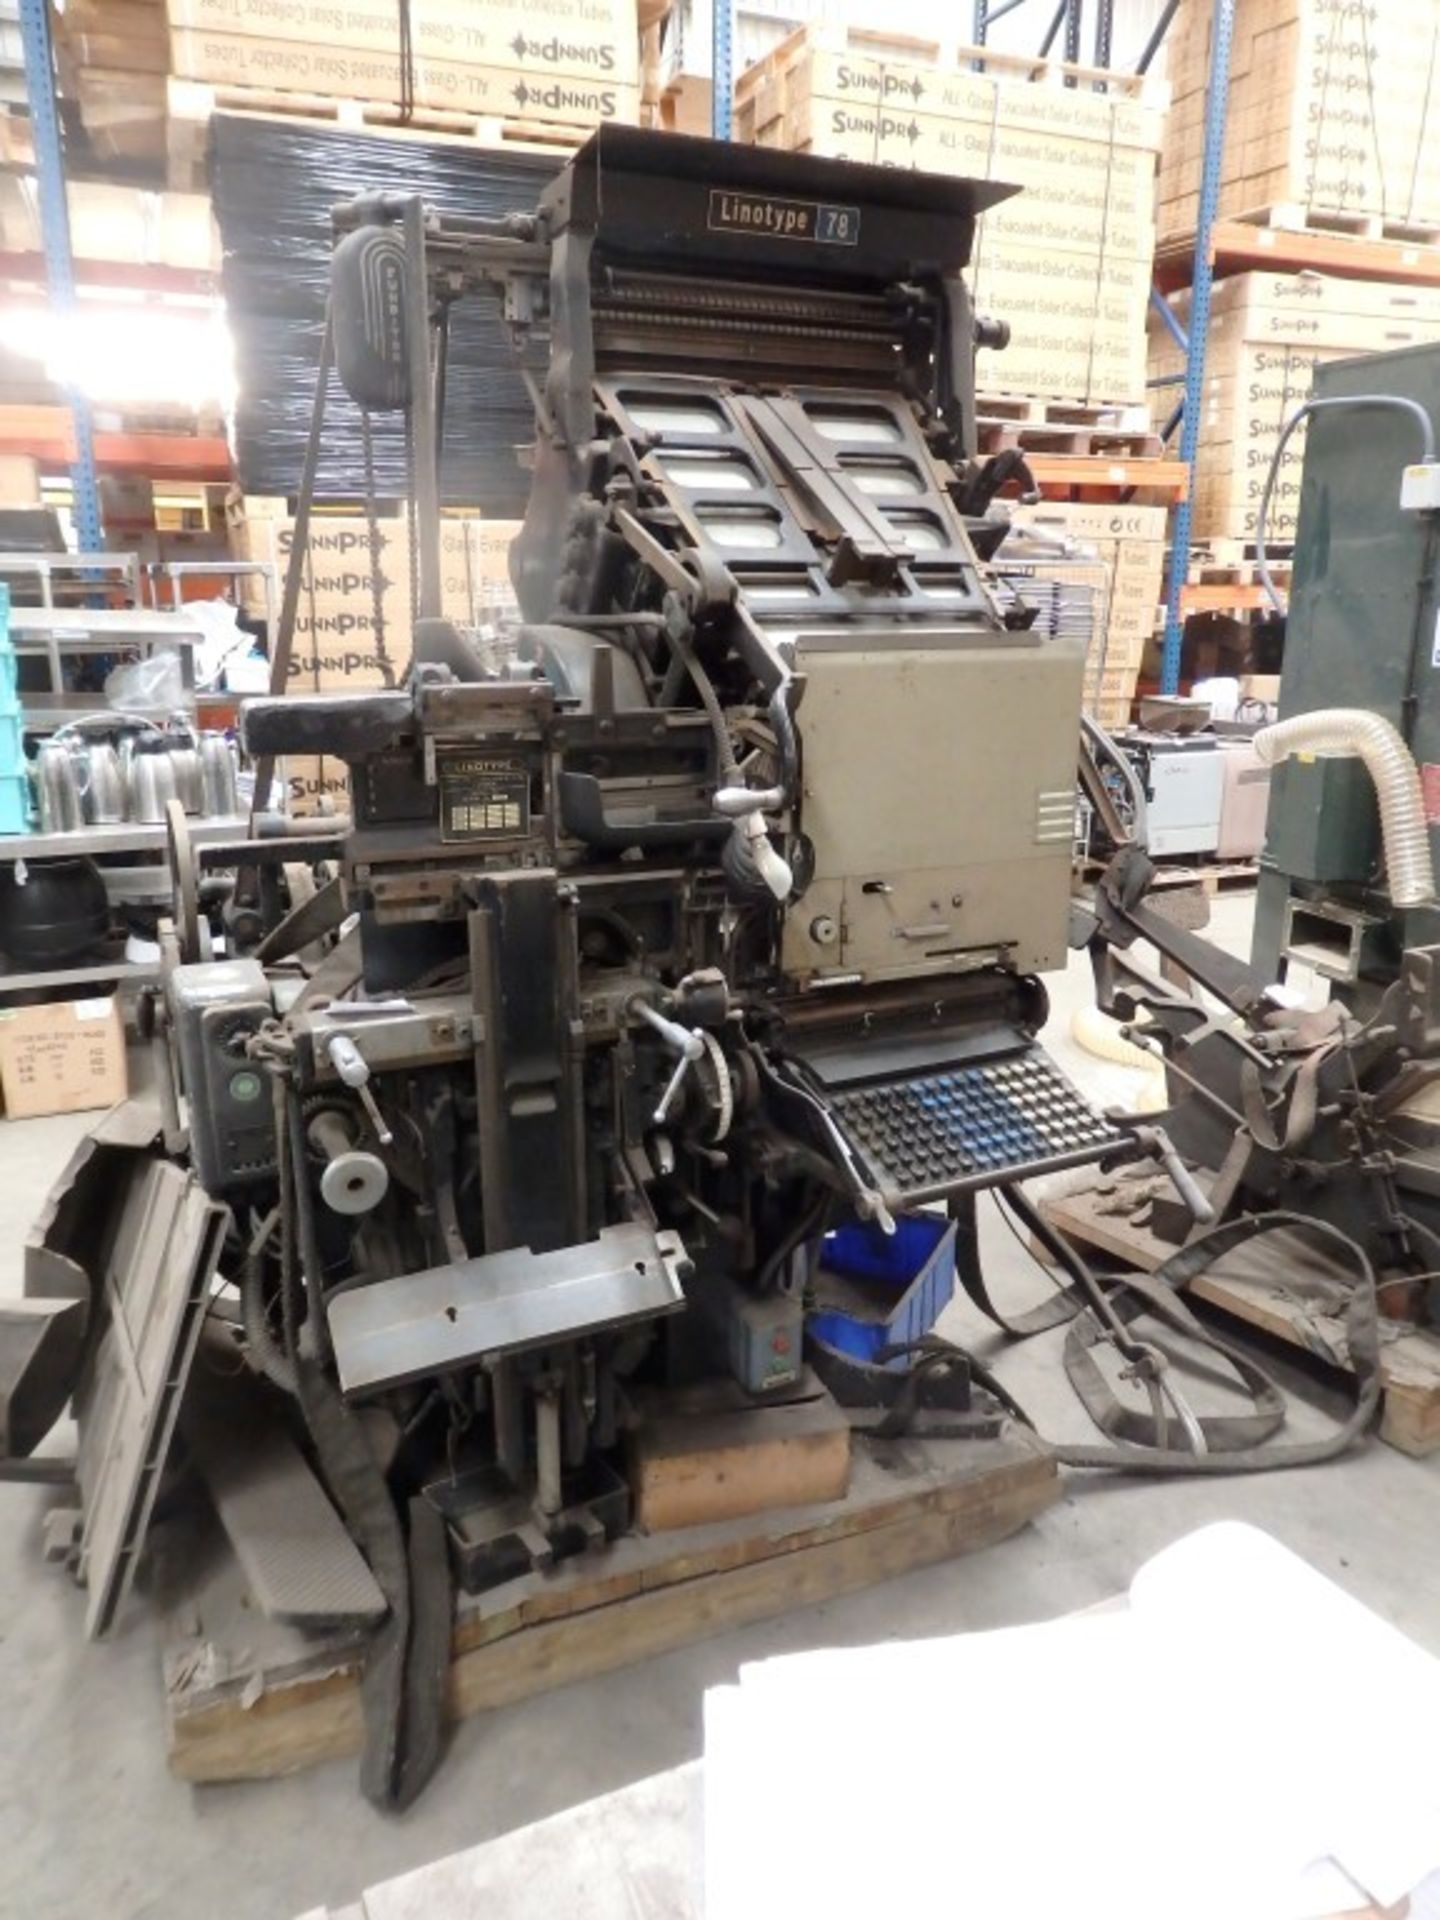 1 x Original Linotype Model 78 Printing Press - Untested In Good Aesthetic Condition - Fantastic - Image 18 of 23